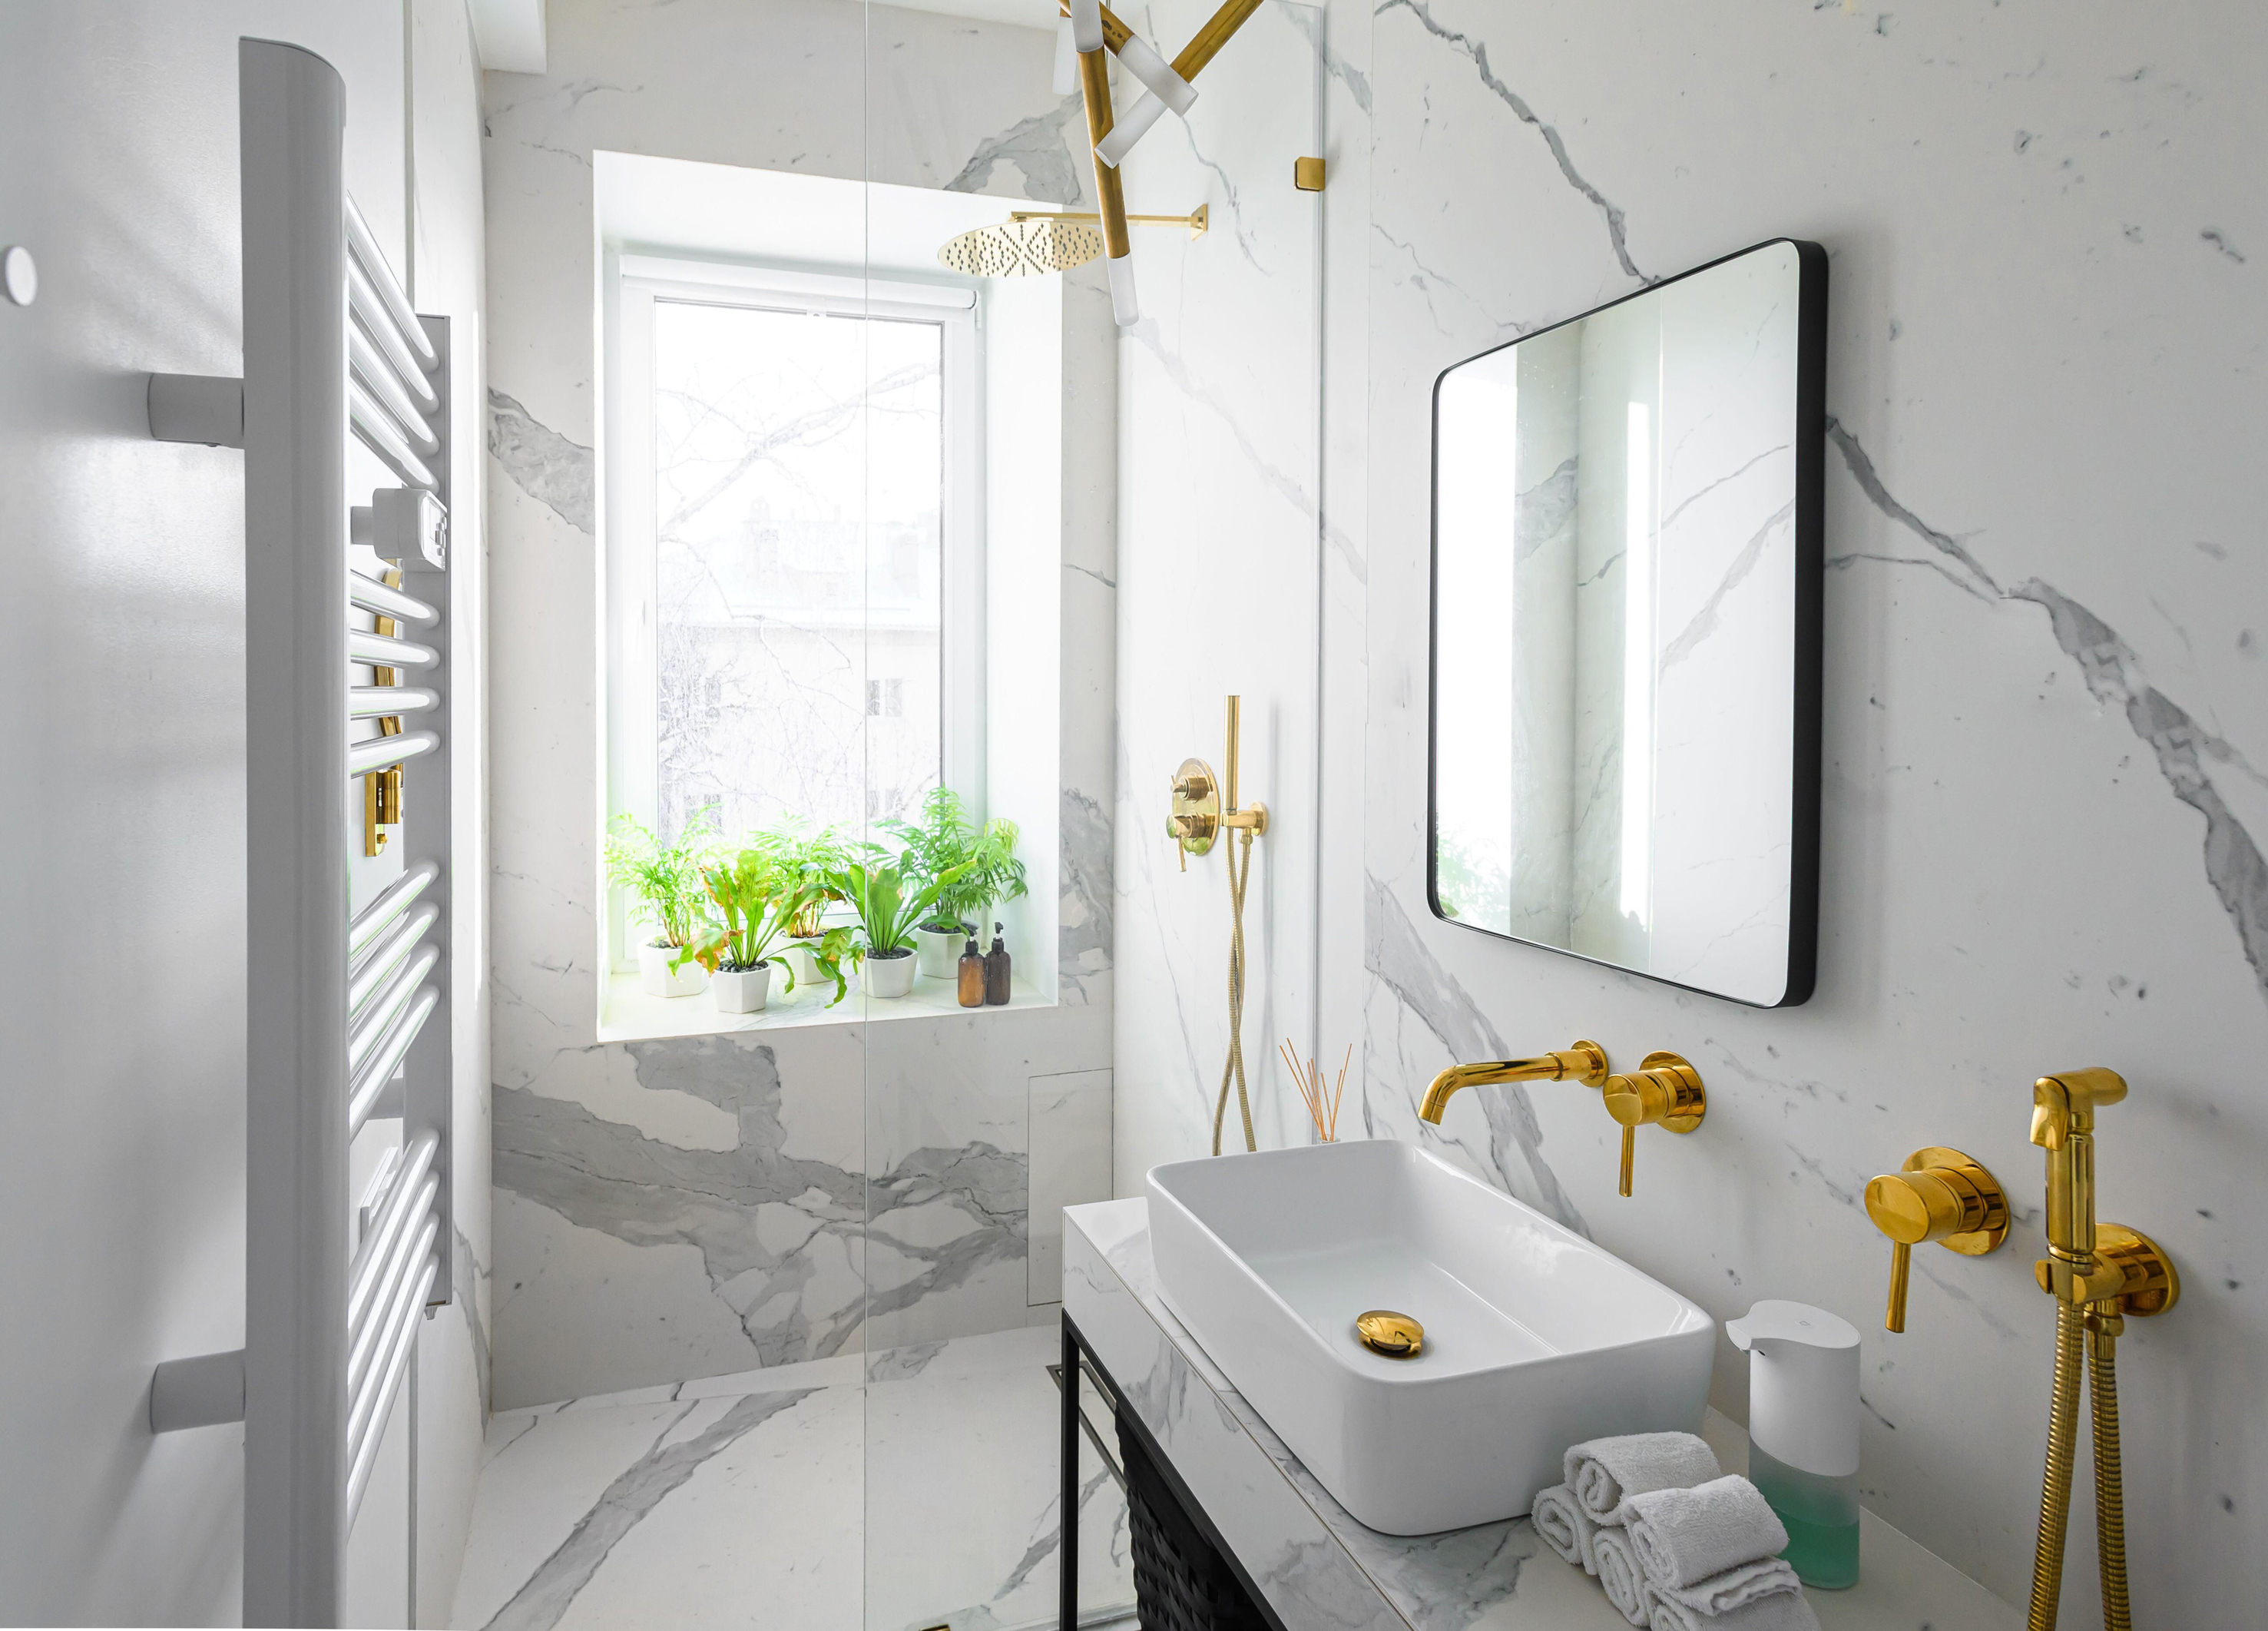 How to create a bathroom sanctuary without blowing the budget